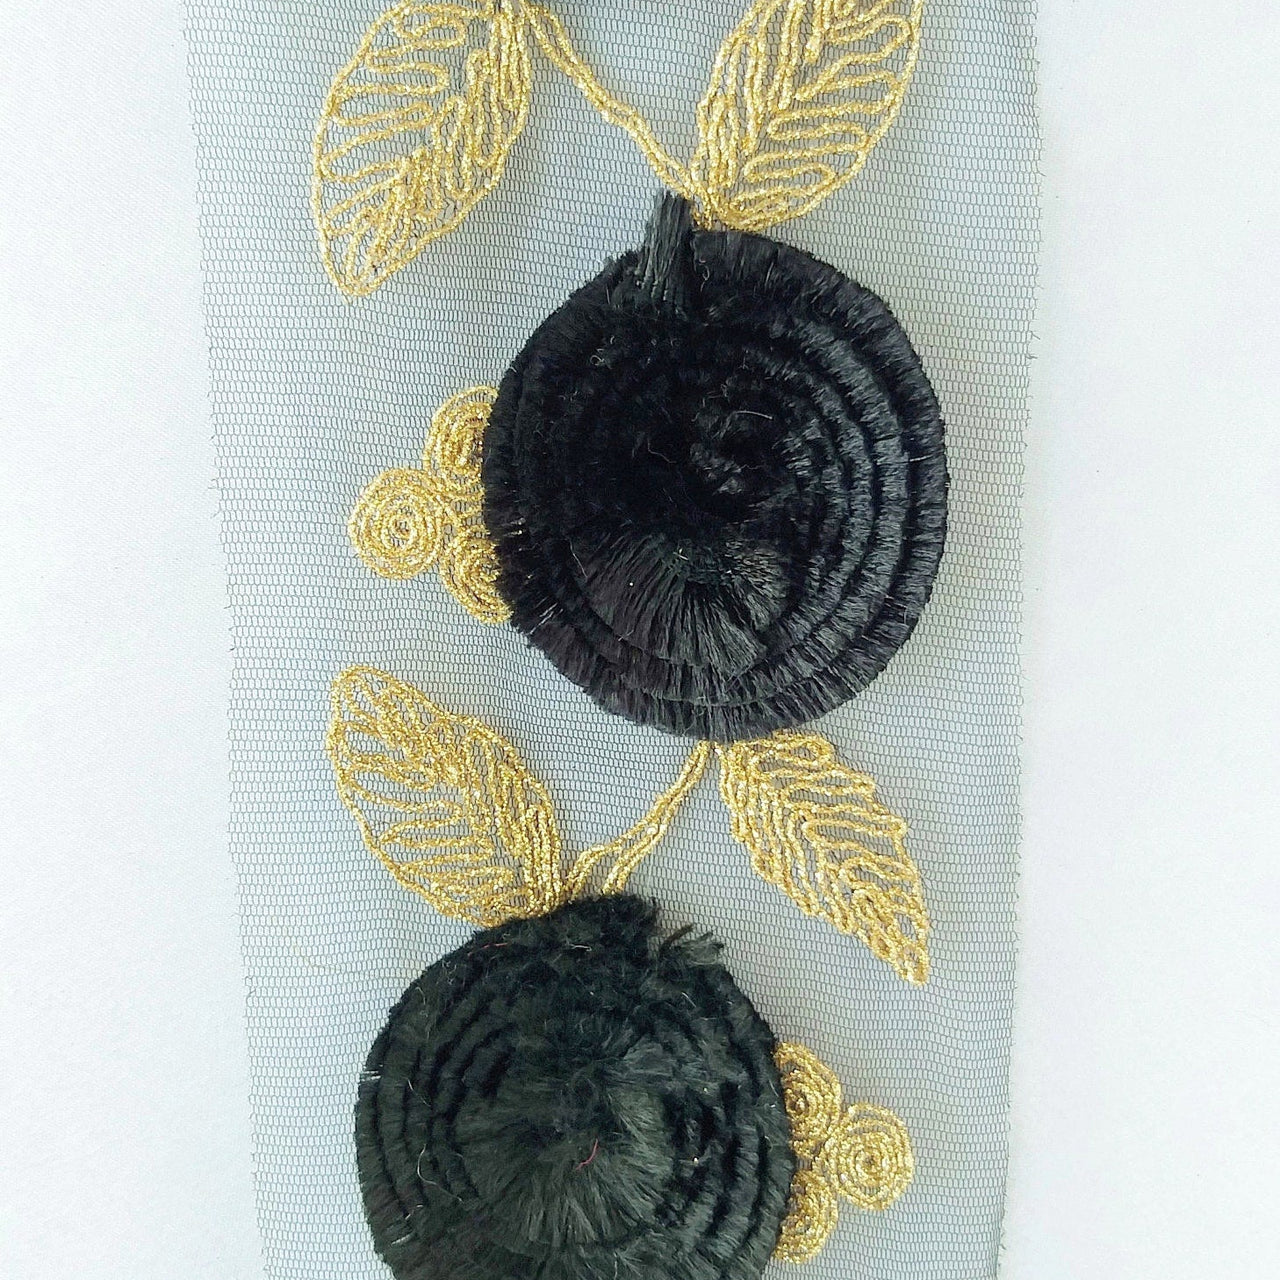 Black Net Lace Trim With Black Thread Flowers and Gold Leaves Embroidery, Approx. 95mm wide